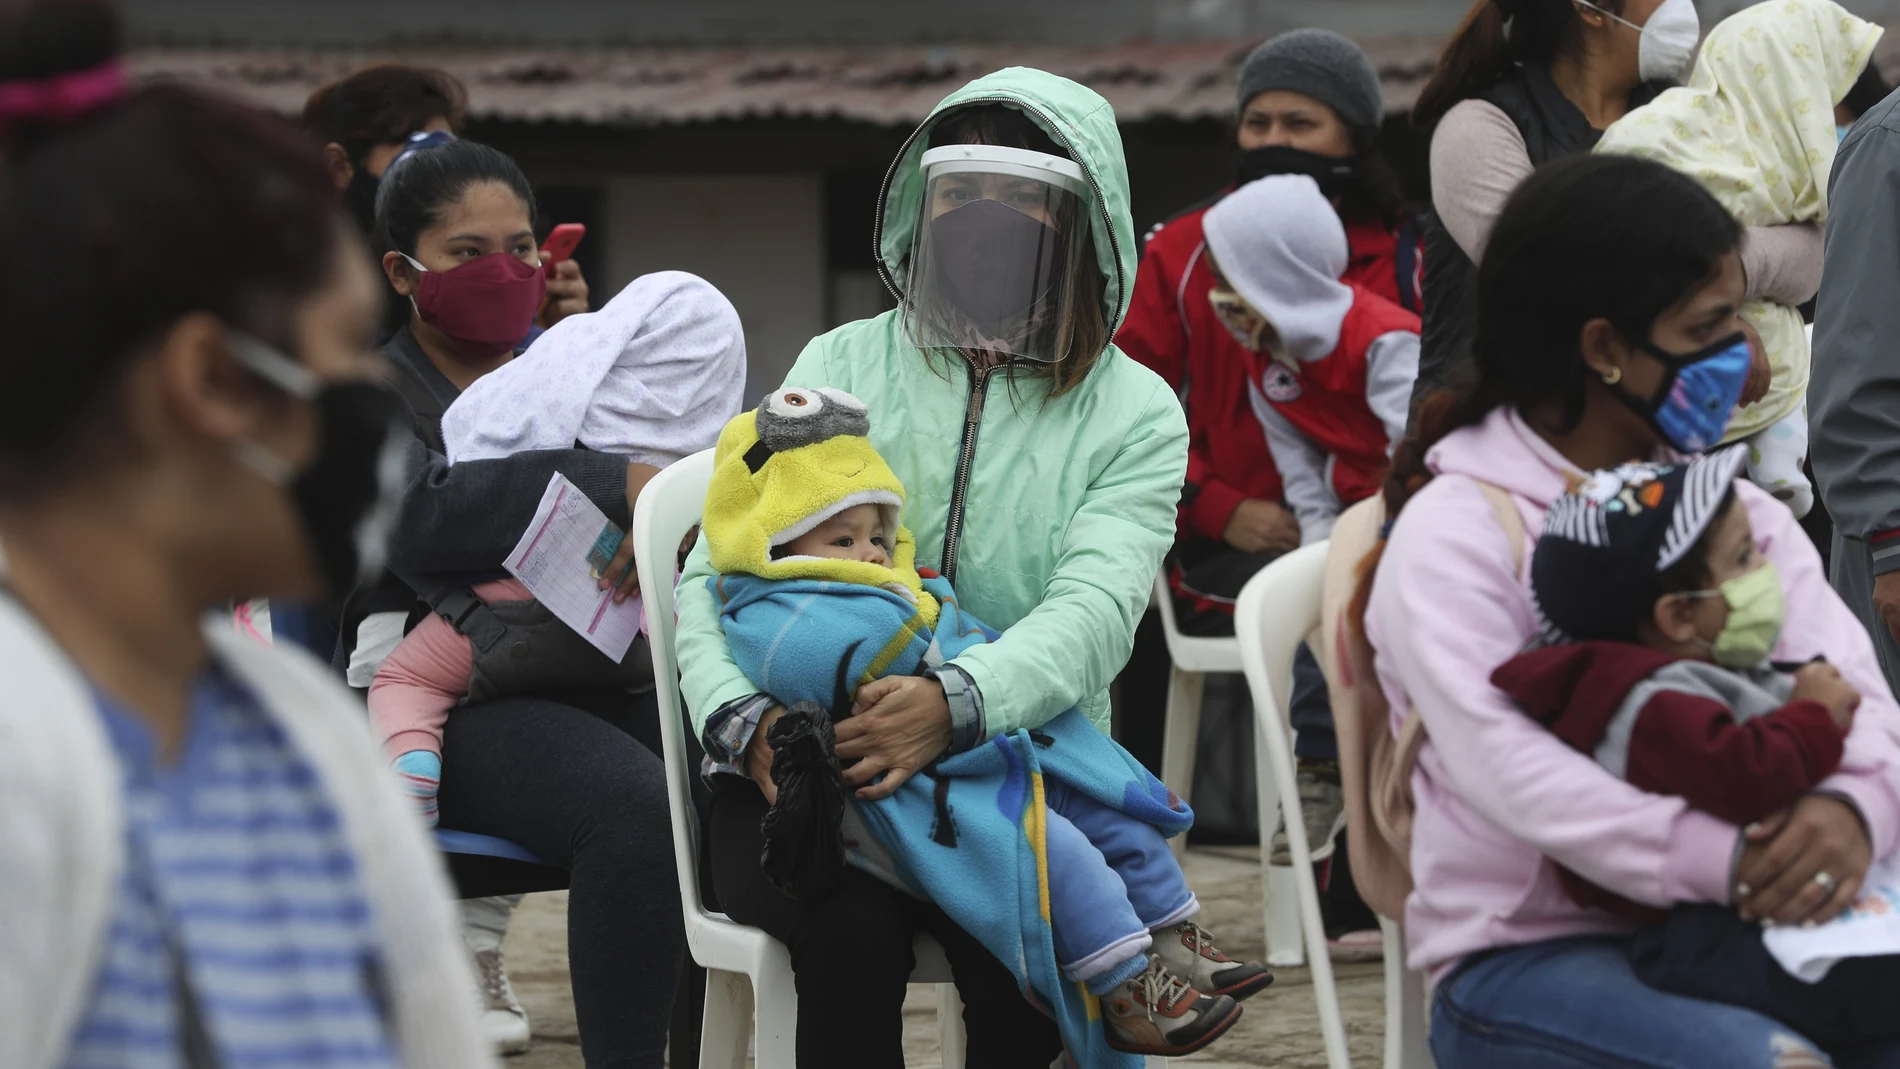 Women hold their children as they wait to vaccinate them during a vaccination campaign in the Villa El Salvador neighborhood of Lima, Peru, Friday, June 26, 2020. In an attempt to strengthen primary health care for vulnerable populations in the country, the Ministry of Health has increased services. (AP Photo/Martin Mejia)